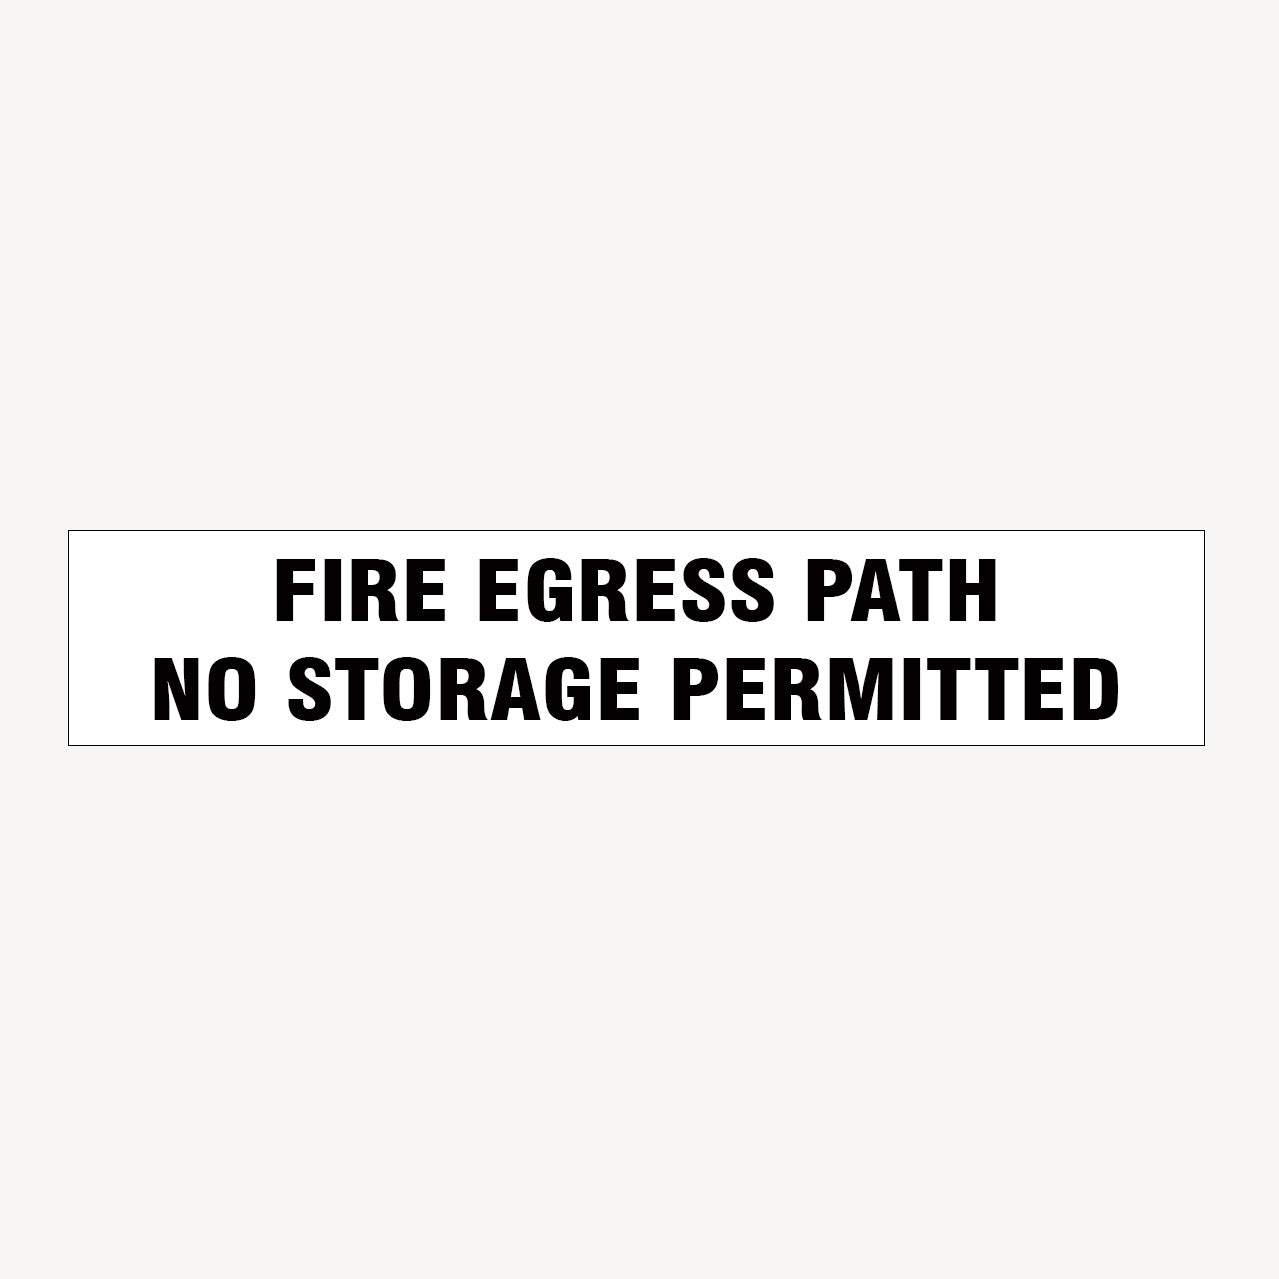 FIRE EGRESS PATH, NO STORAGE PERMITTED SIGN